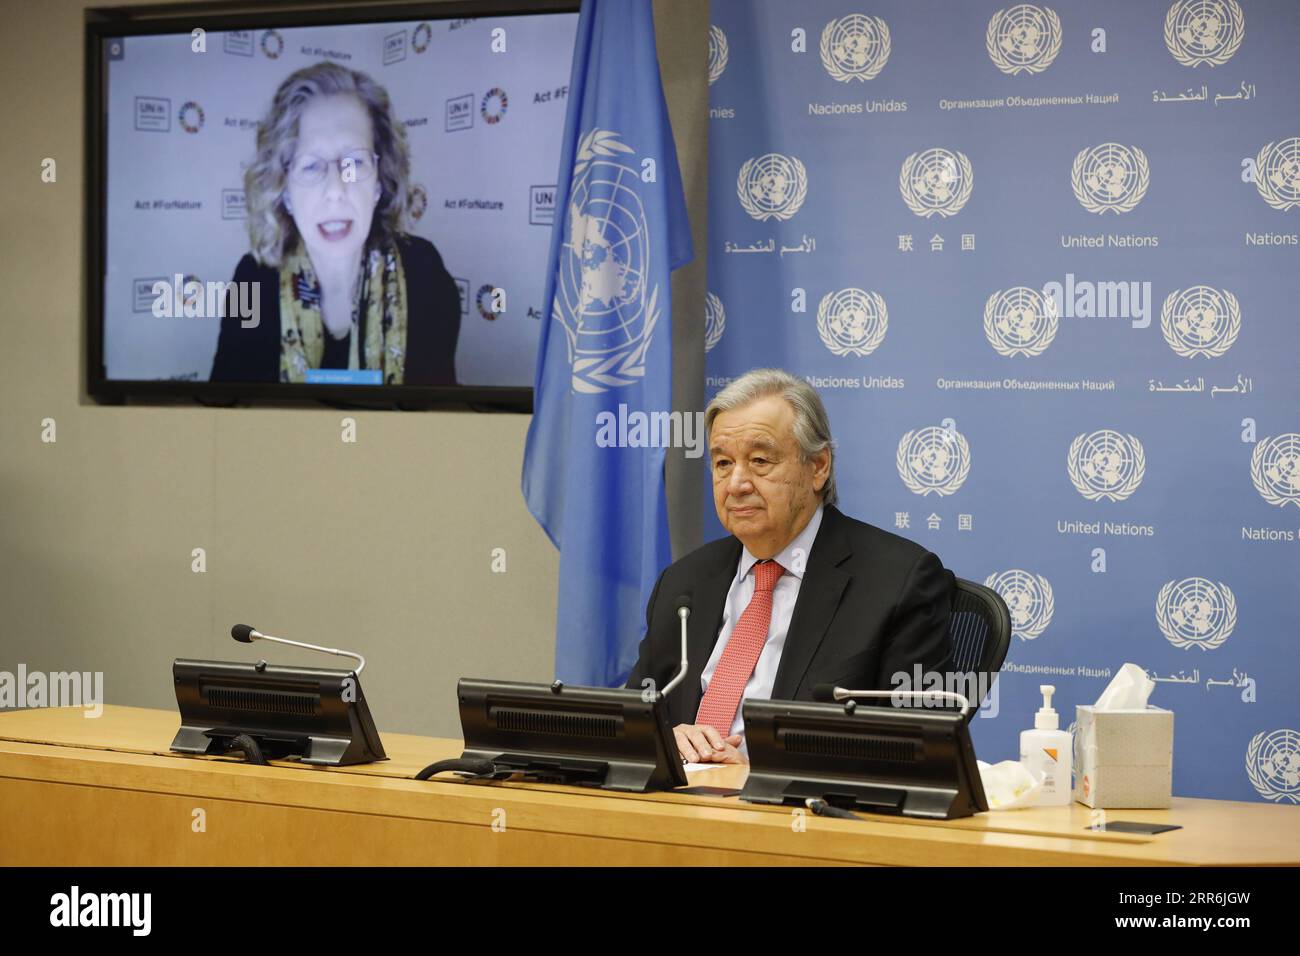 210218 -- UNITED NATIONS, Feb. 18, 2021 -- UN Secretary-General Antonio Guterres and the Executive Director of the UN Environment Programme UNEP Inger Andersen on screen attend a press conference for the launch of a UN Environment Programme report, Making Peace with Nature. at the UN headquarters in New York, on Feb. 18, 2021. Guterres on Thursday asked for global action to stop a senseless and suicidal war on nature and address climate disruption, biodiversity loss and pollution.  UN-ANTONIO GUTERRES-PRESS CONFERENCE XiexE PUBLICATIONxNOTxINxCHN Stock Photo